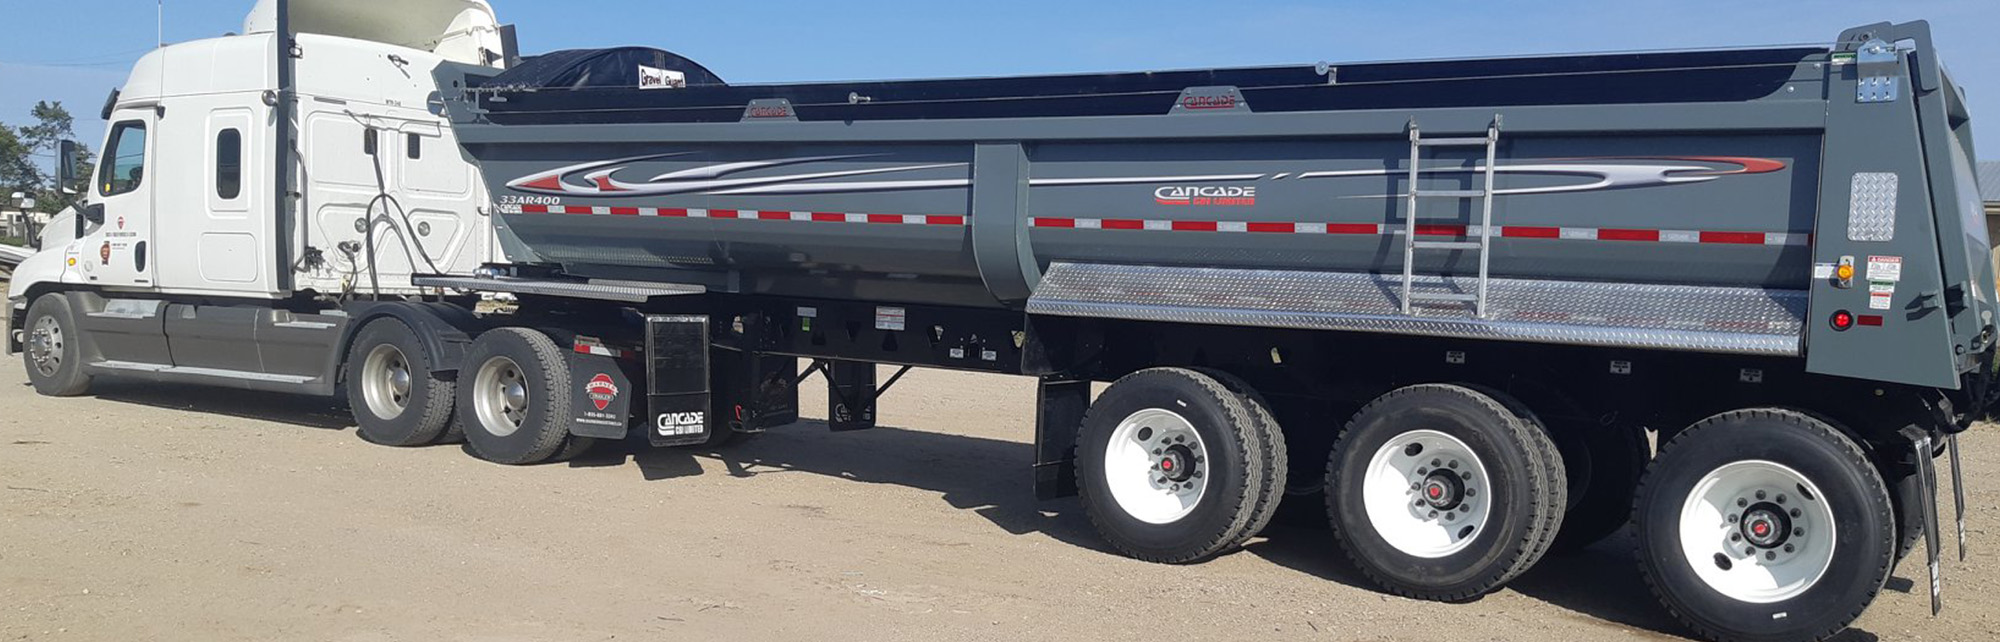 Used Cancade Trailers in Canada